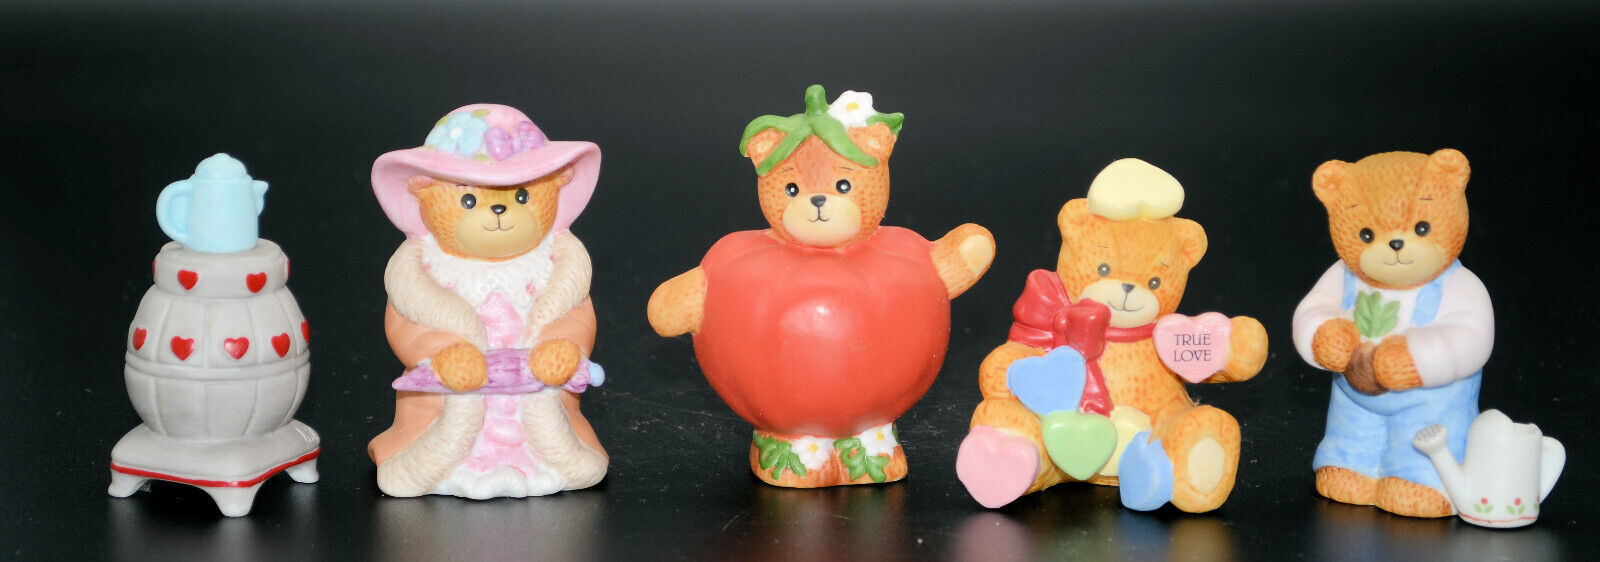 Lucy Rigg Ceramic Bears Costumes 2-½” - 3-½” Tall Set of 5 D-11